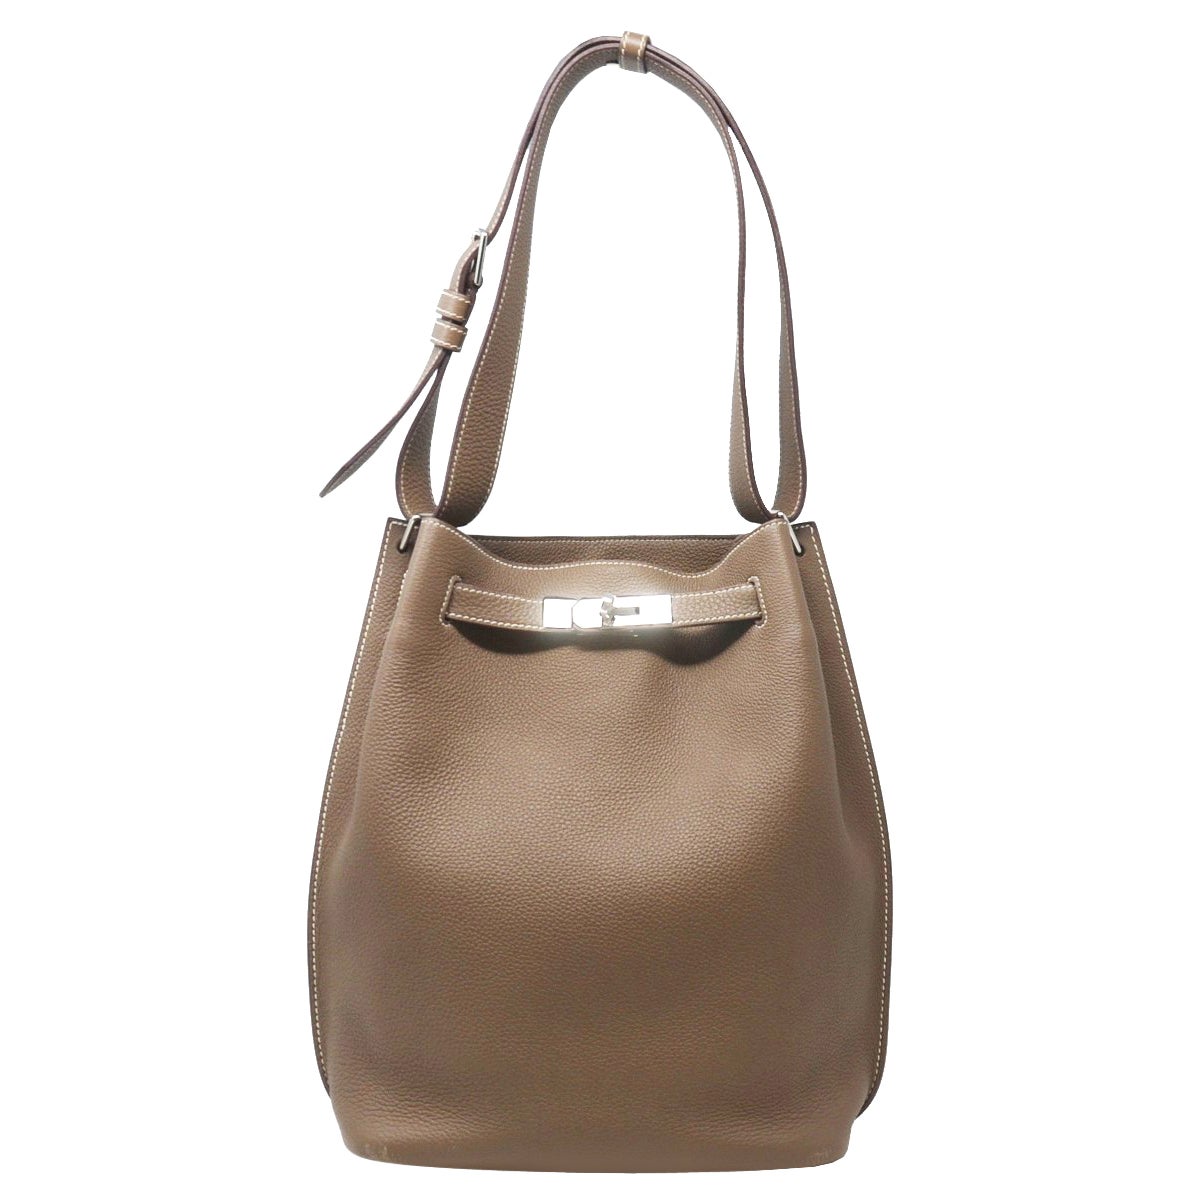 Hermes Kelly 28cm strap handbag in brown calf customized with brown ...